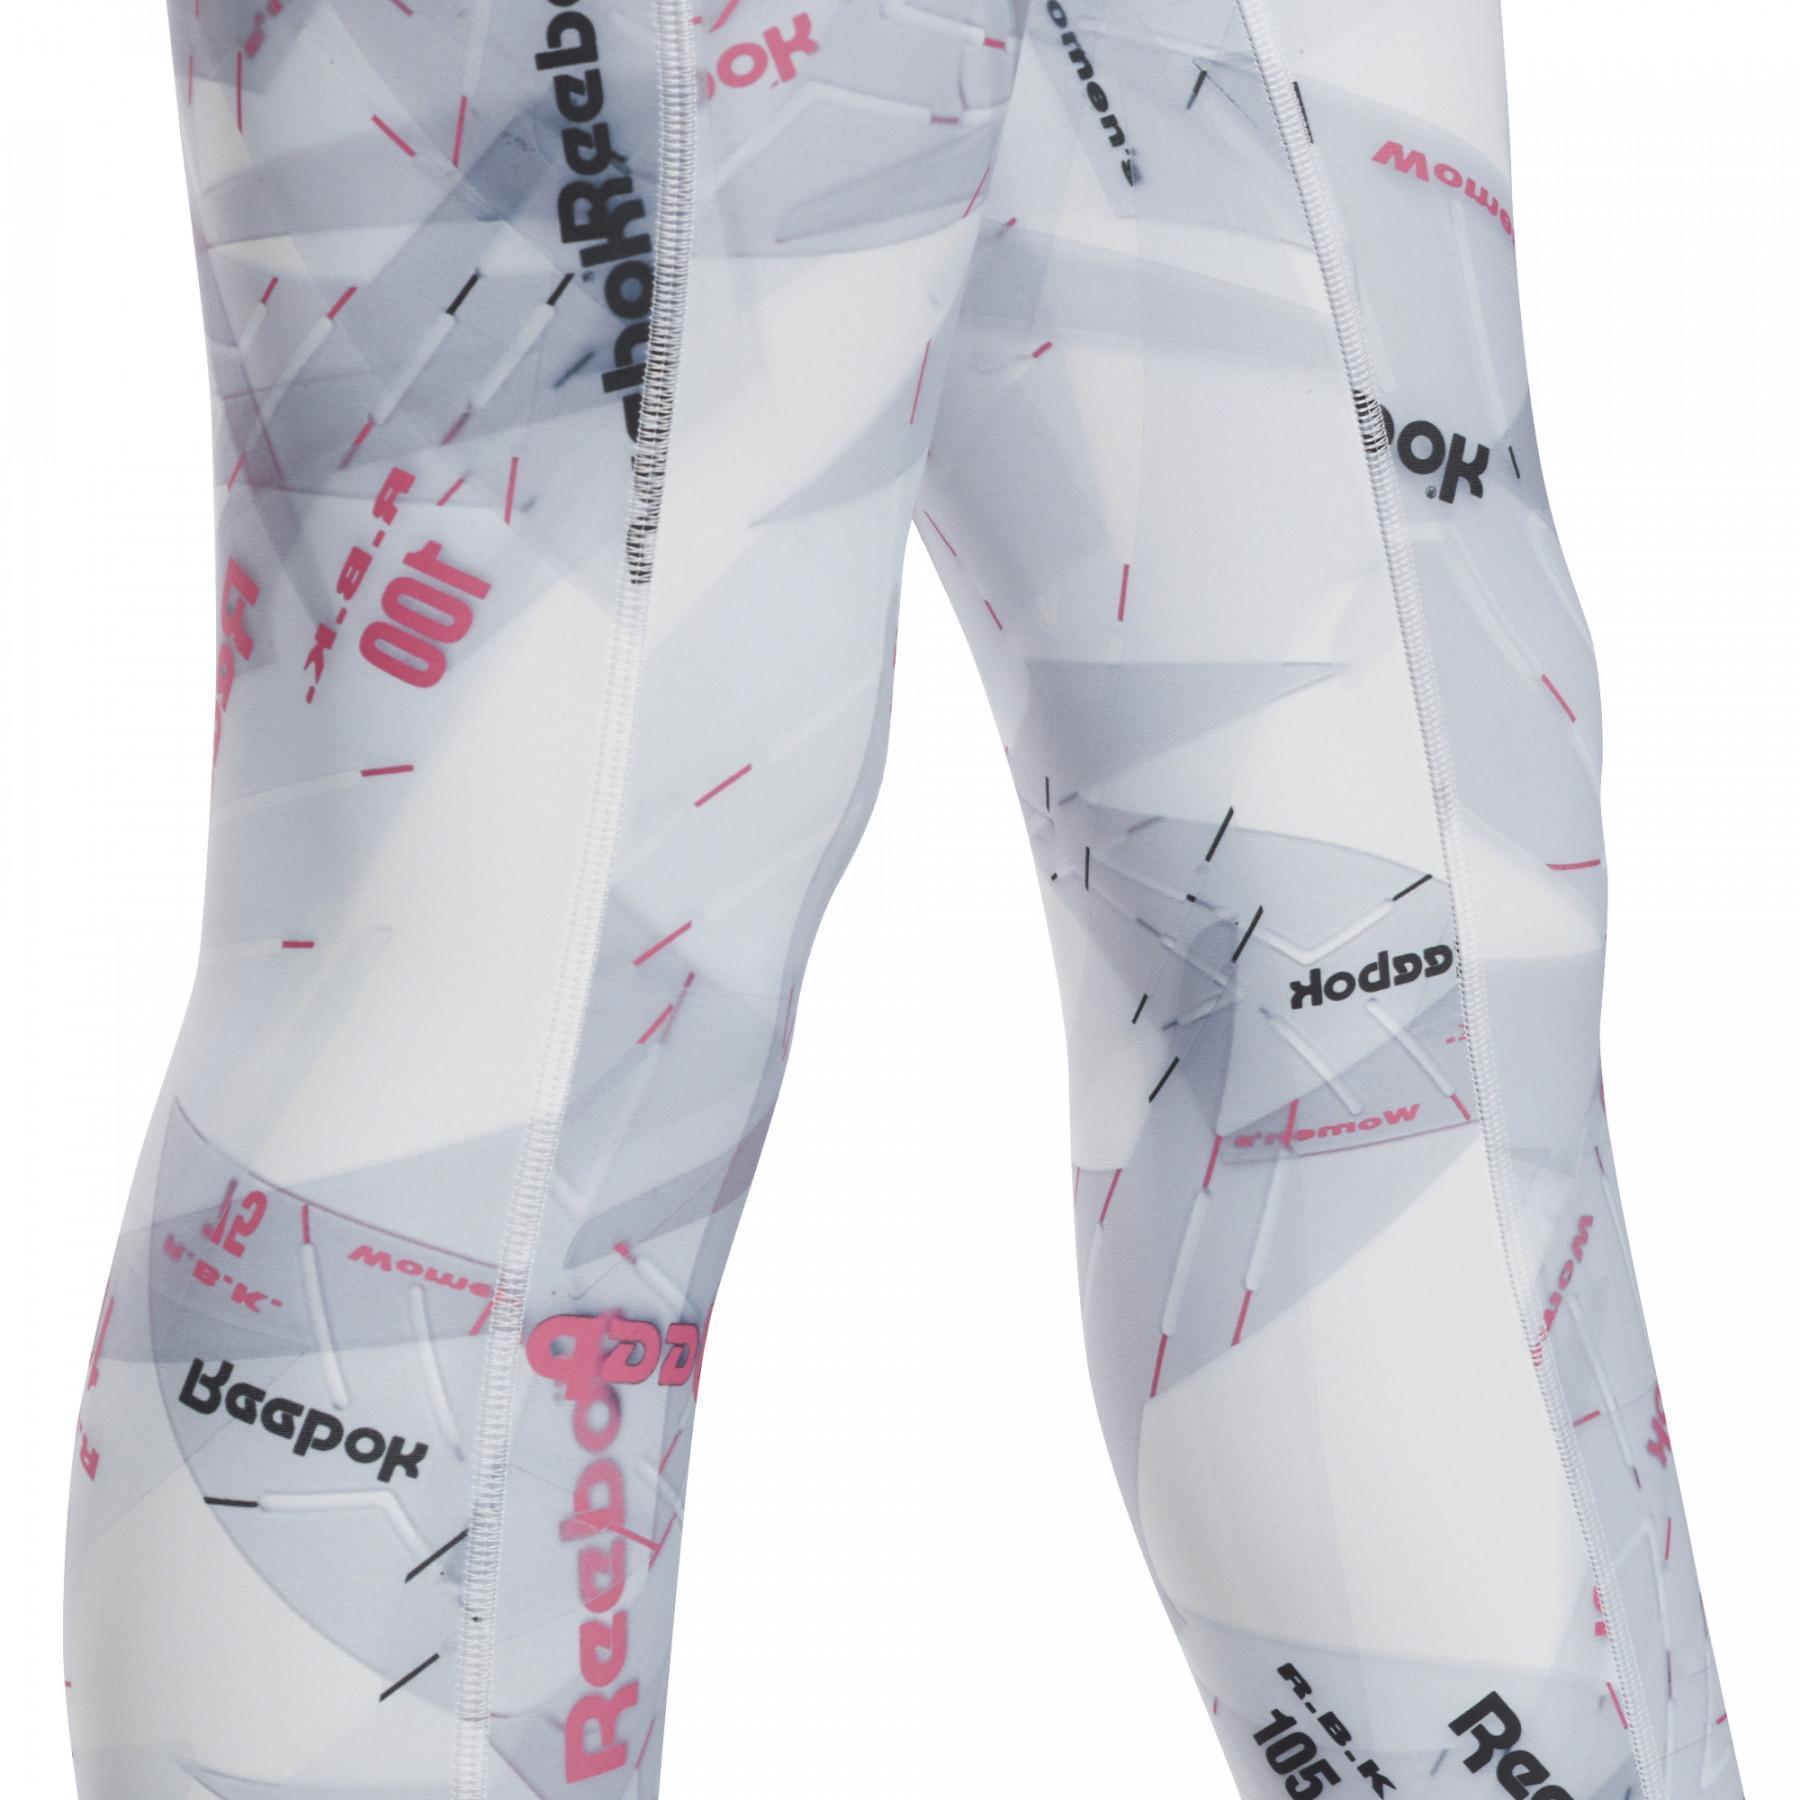 Women's tights Reebok Studio Lux Bold High-Rise 2.0 - Electricity